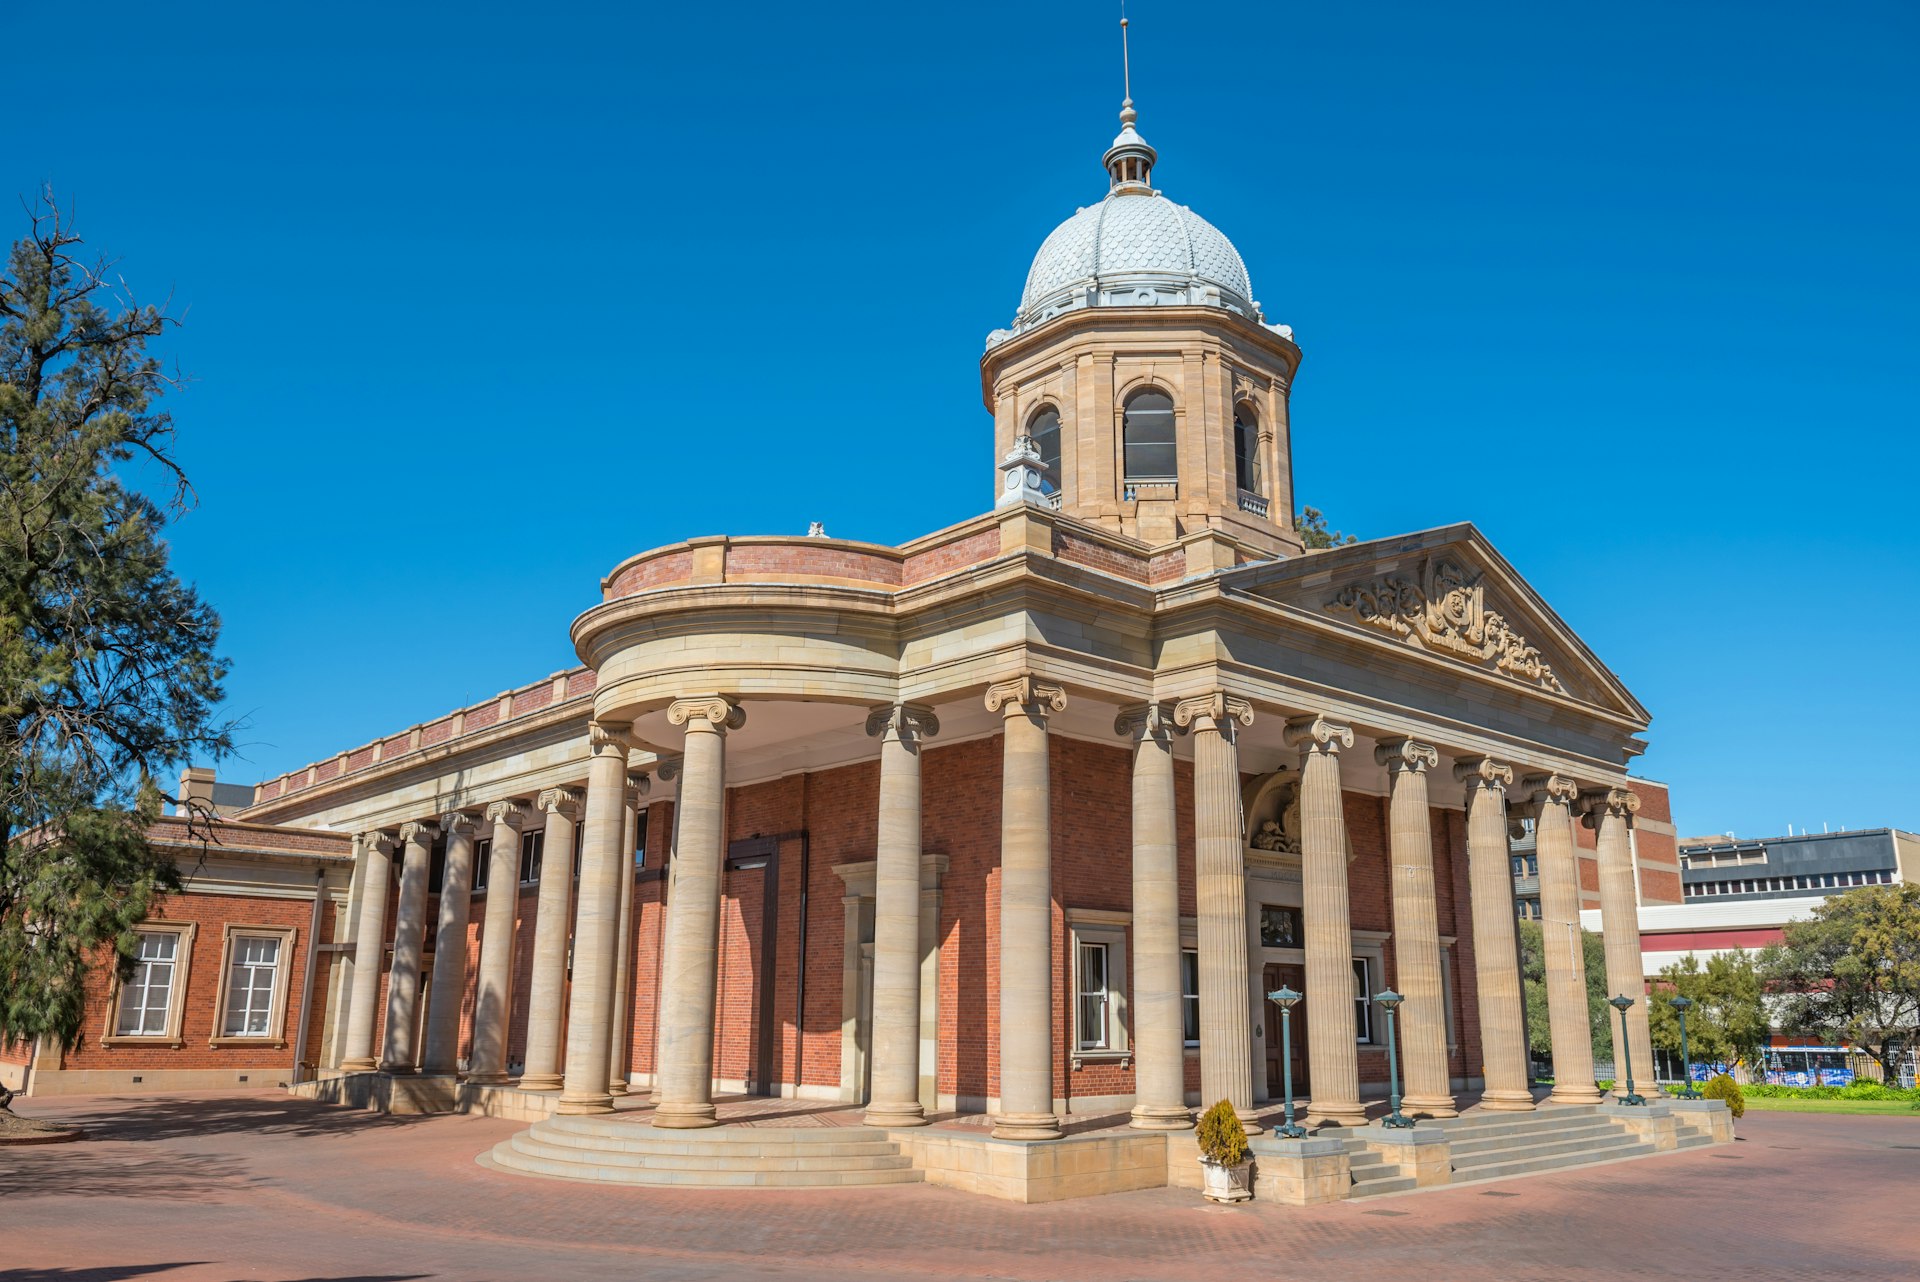 The historical Fourth Raadzaal, seat of Free State Provincial Government was completed in 1892 and is a national monument